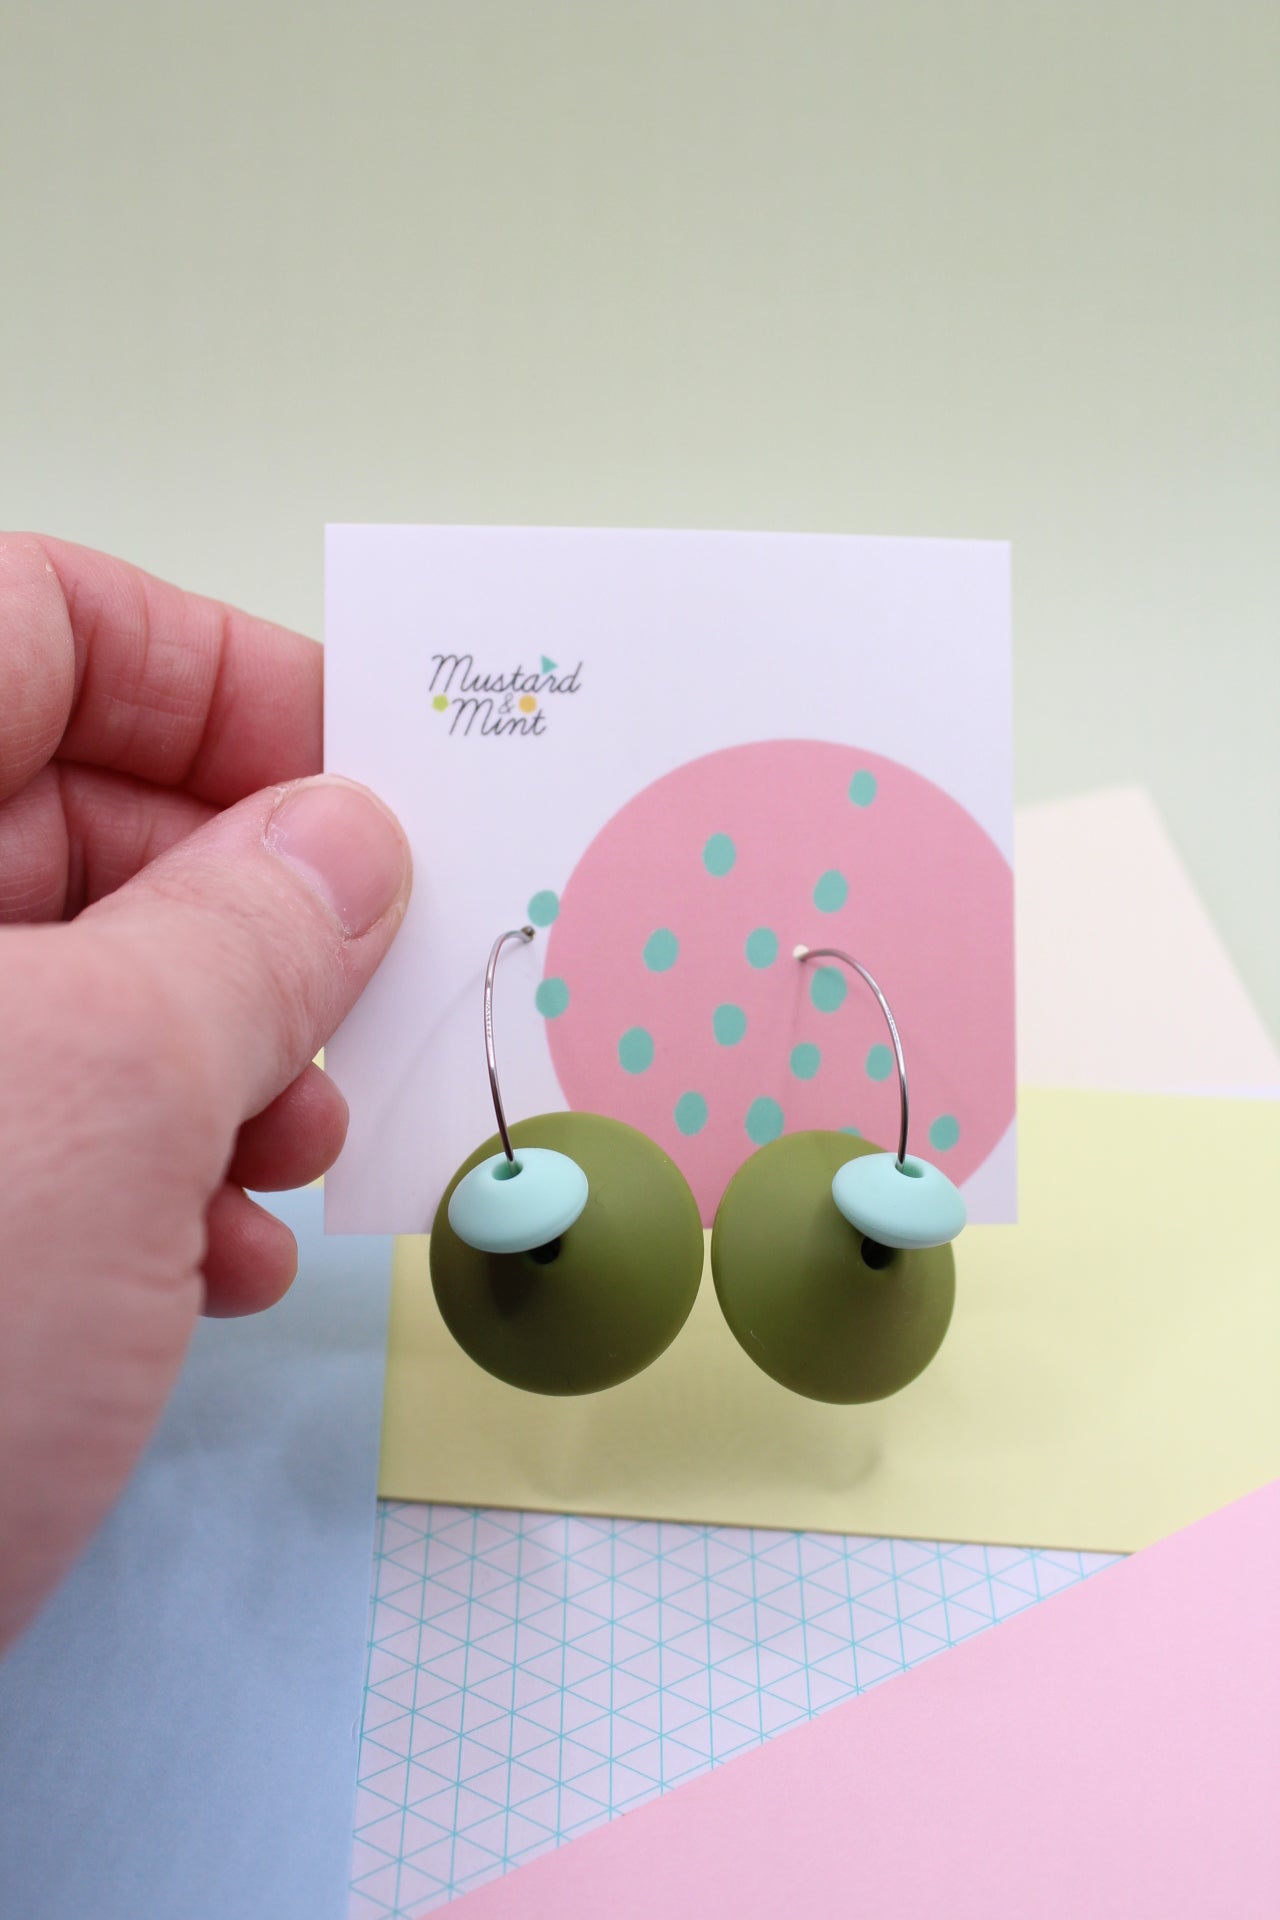 Army Green silicone dangle earrings being held up in models fingers on their Mustard & Mint branded backing board.